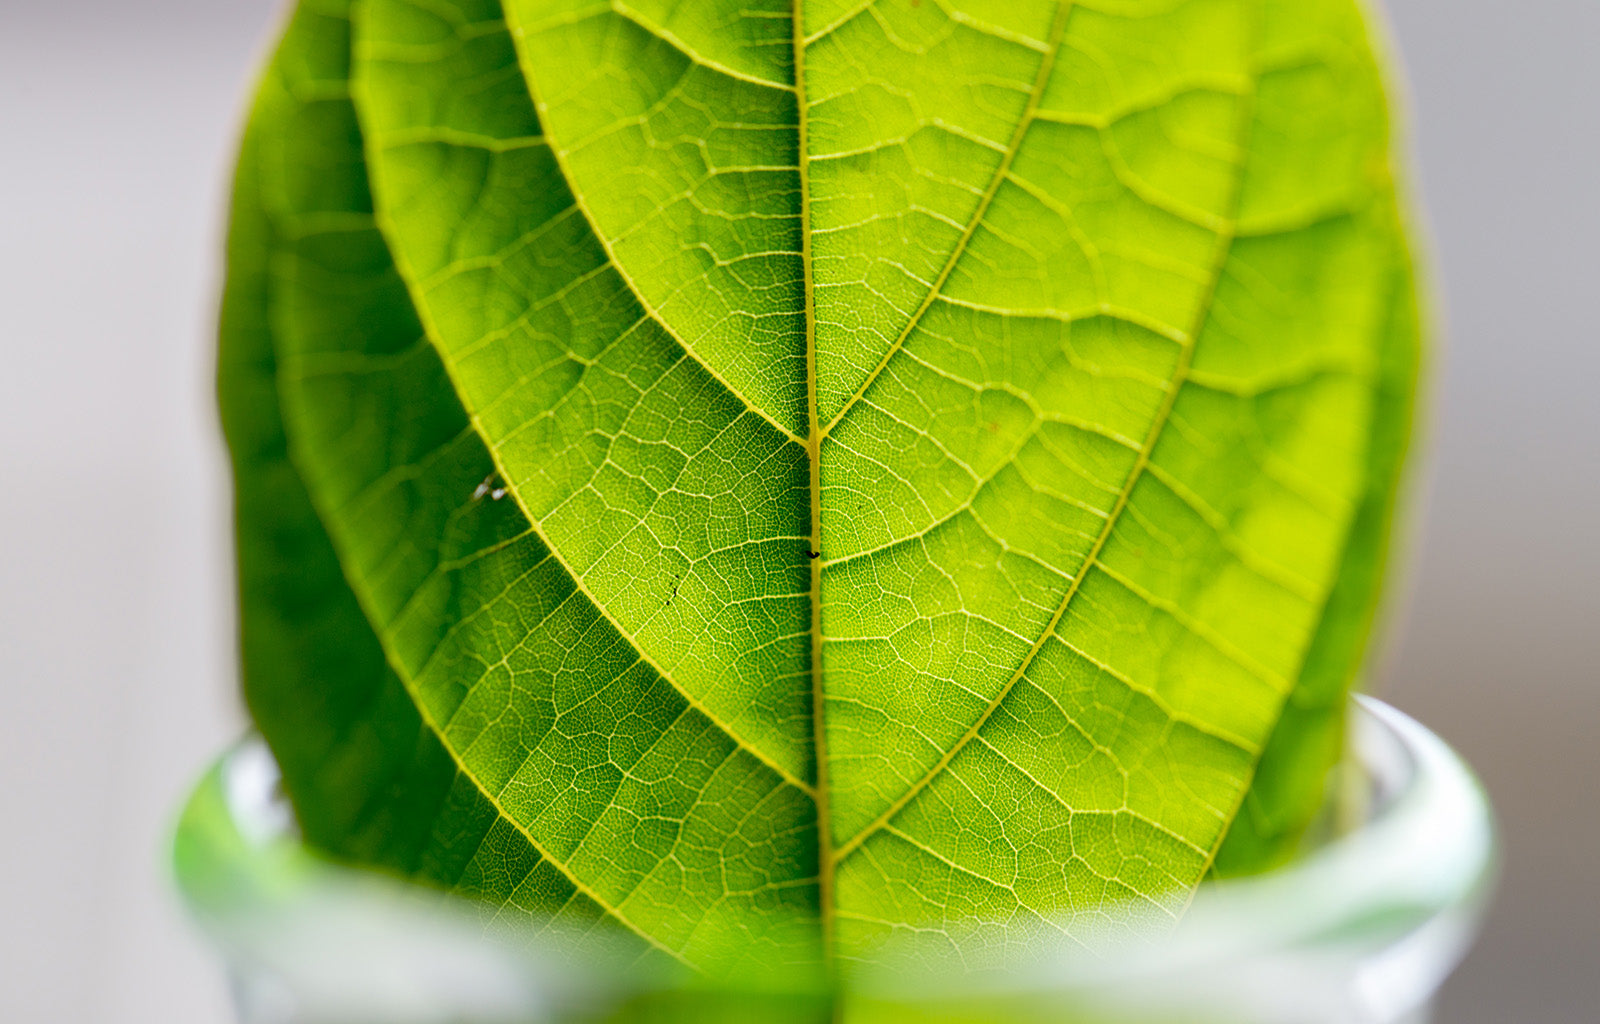 Featured image depicting the top of a test tube, with a single kratom leaf poking out  - The implication being that kratom is still being studied to understand its side effectsthe top